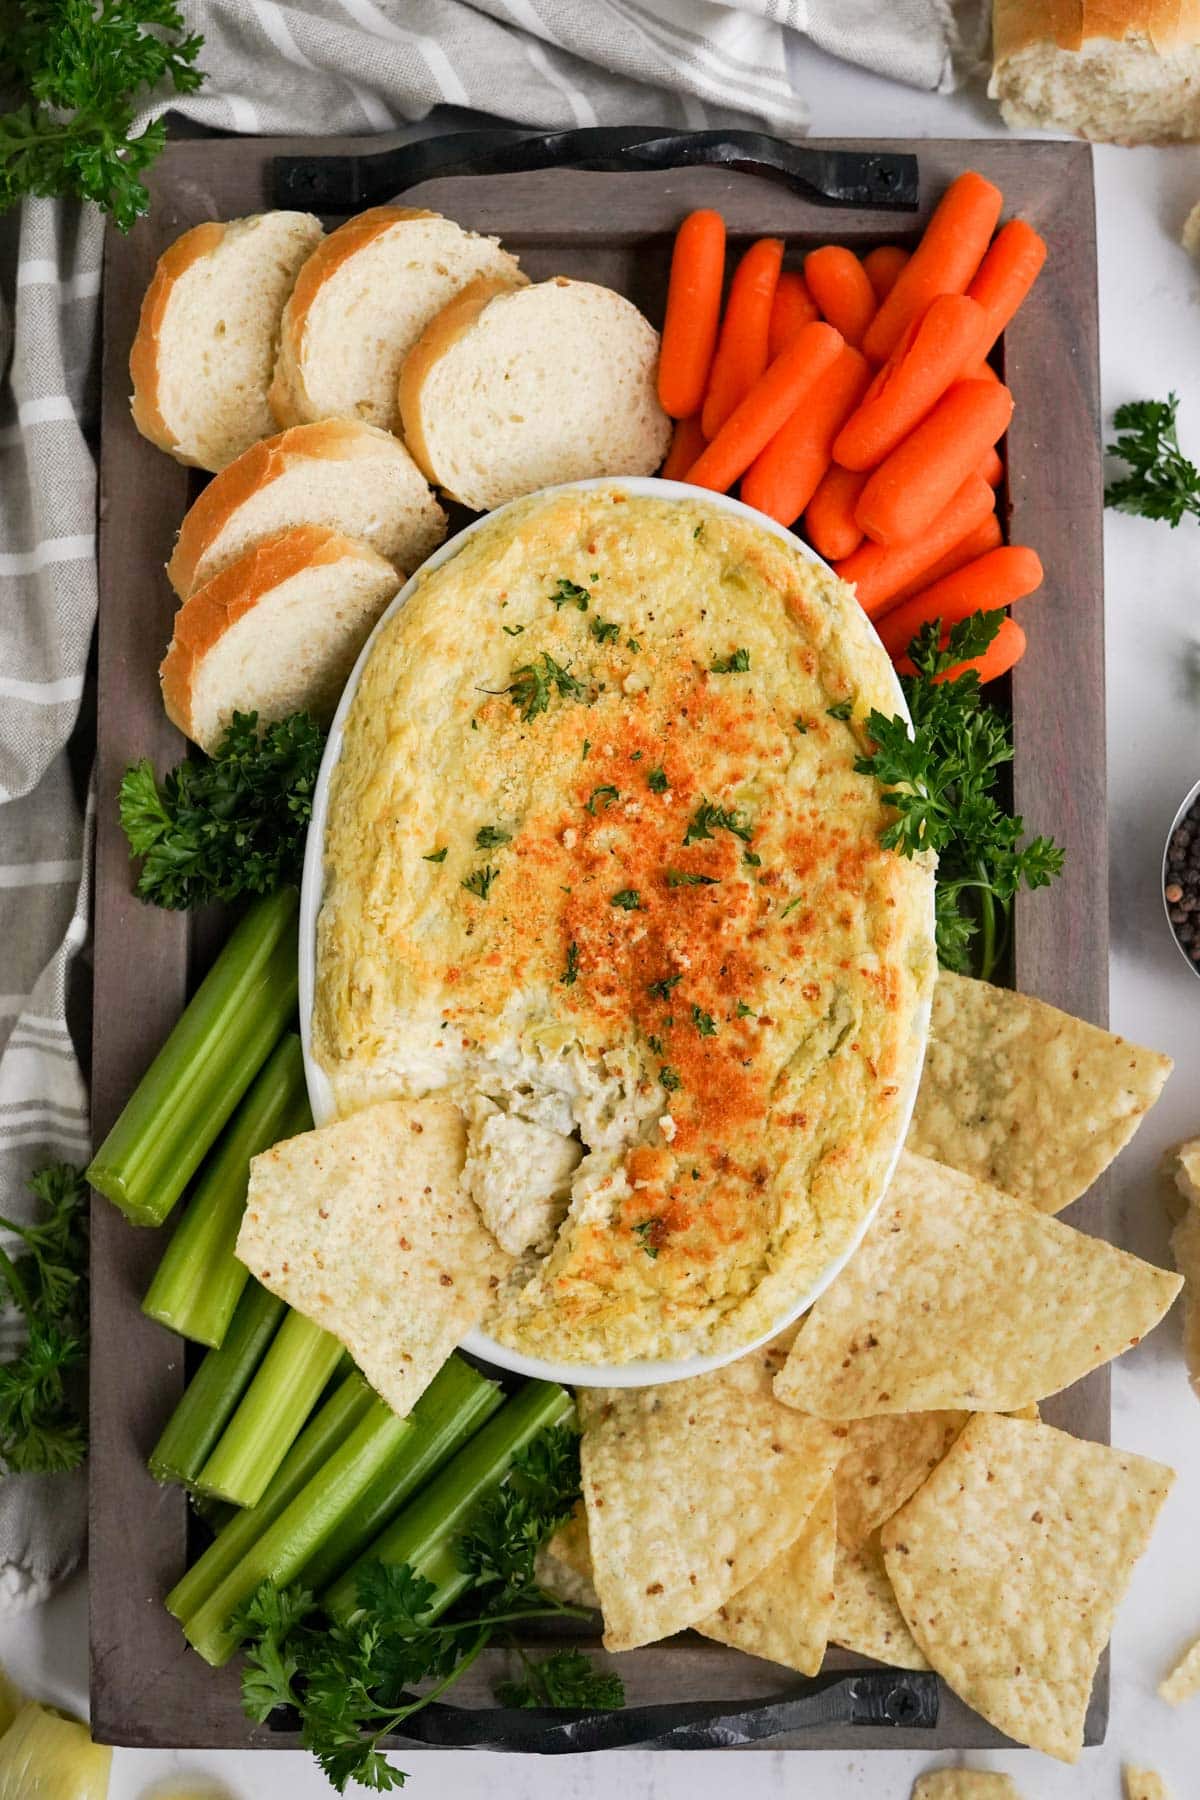 artichoke dip in a white dish with carrots, celery, bread and tortillas chips